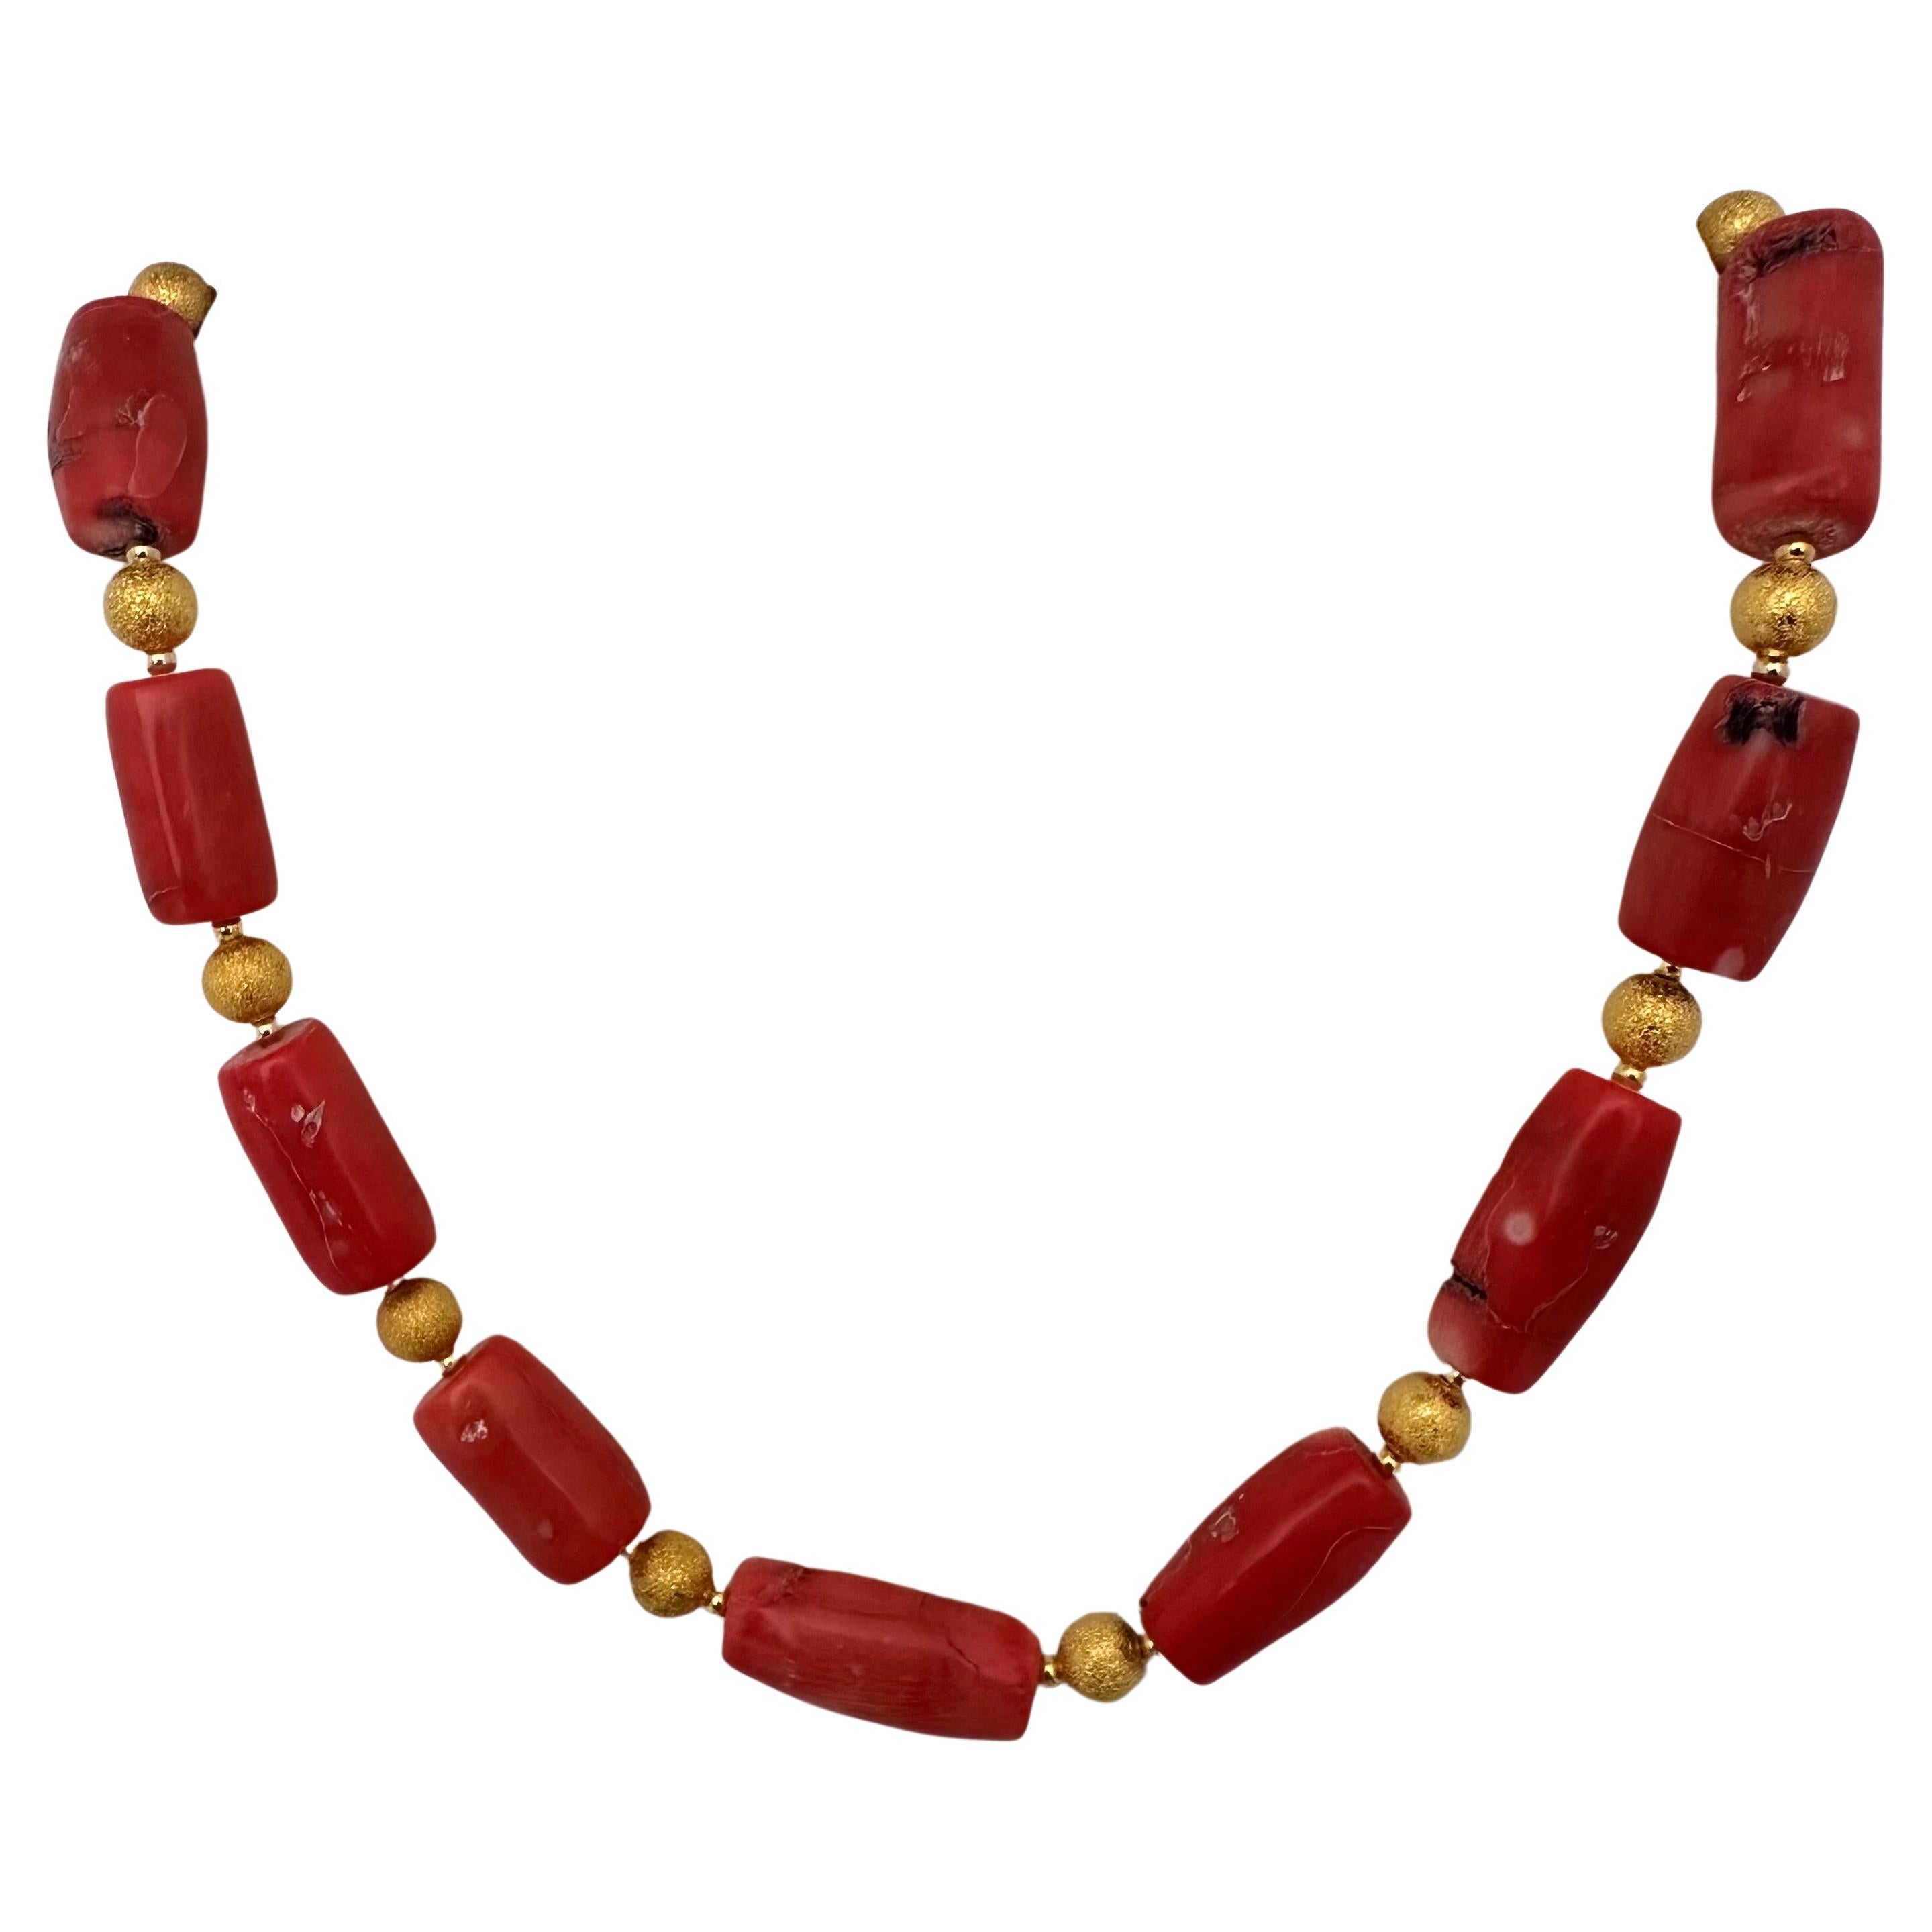 Handmade Gold Plated Beads & Salmon Barrel Shape Coral Beaded 19" Necklace #C36 For Sale